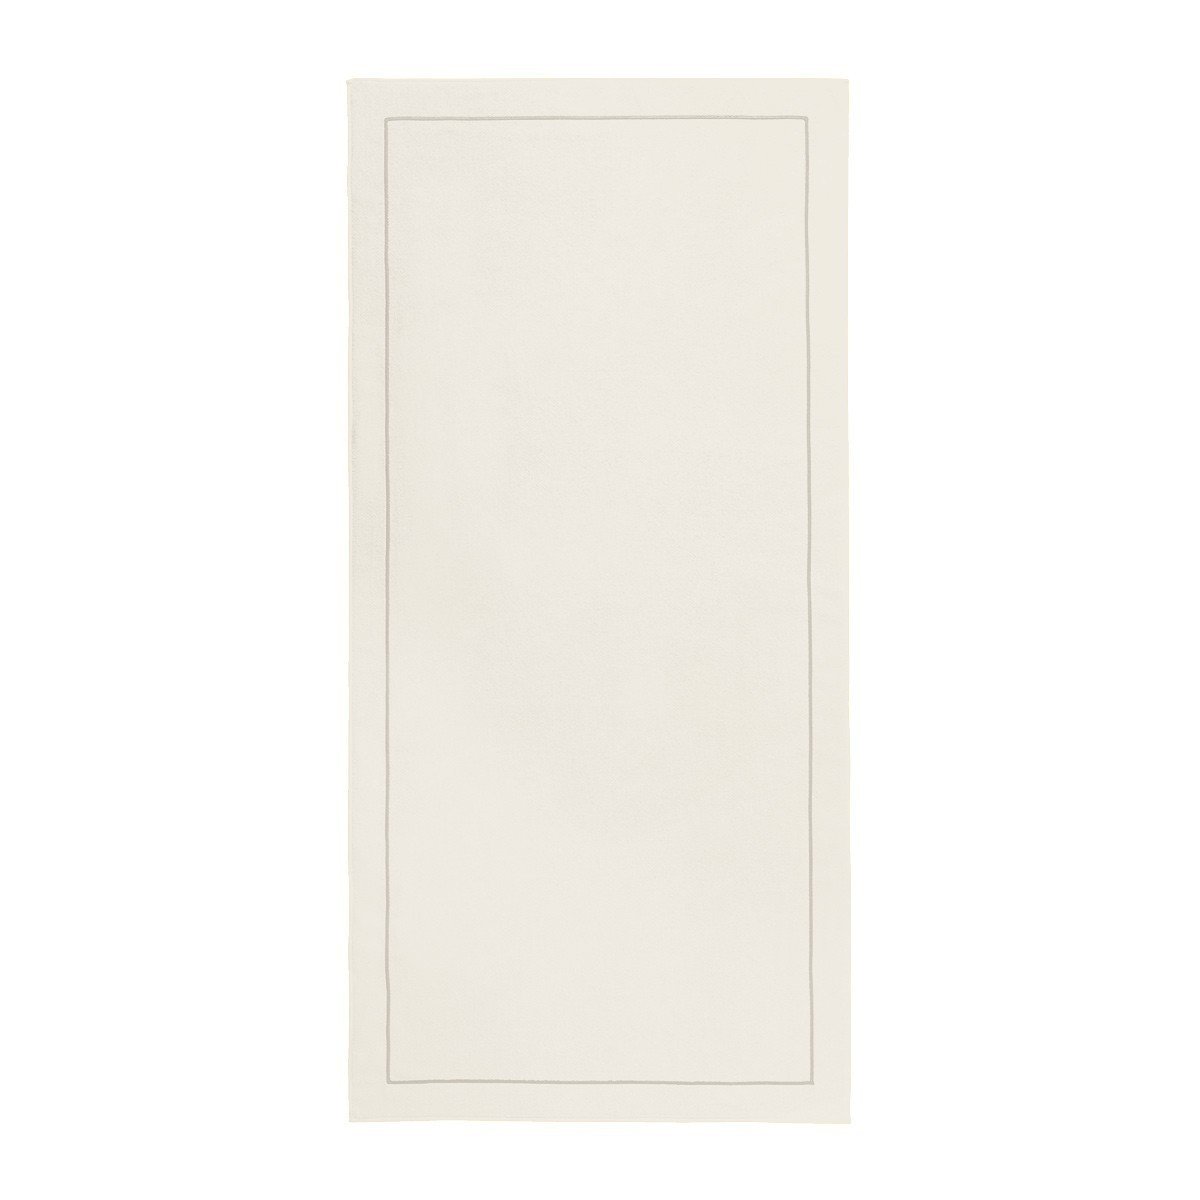 Croisiére Ecru Ivory Beach Towel by Yves Delorme Fig Linens